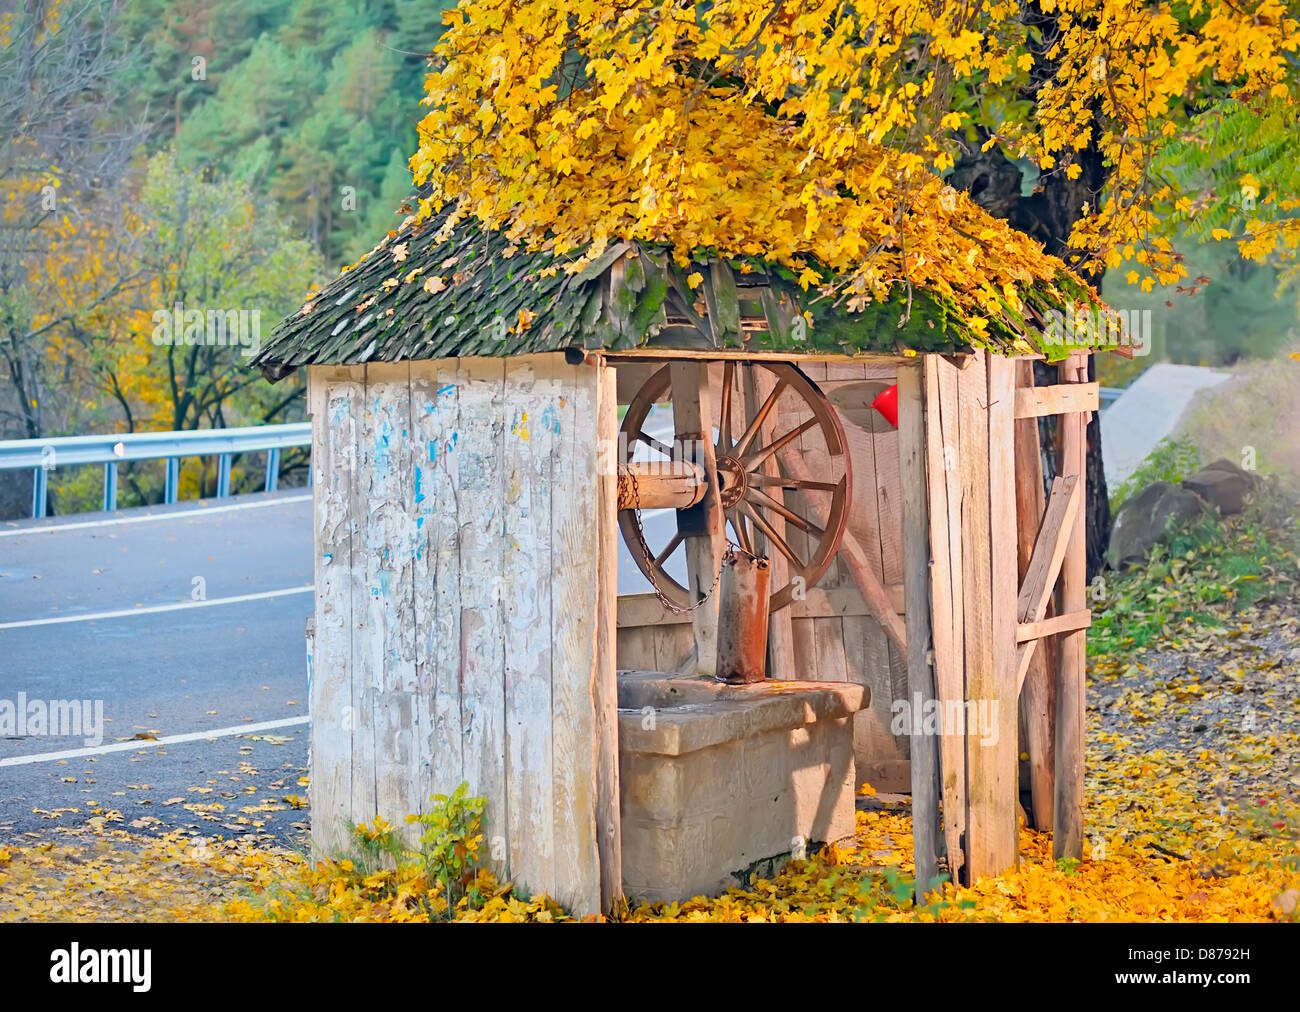 Countrry alte gut im Herbst Stockfoto